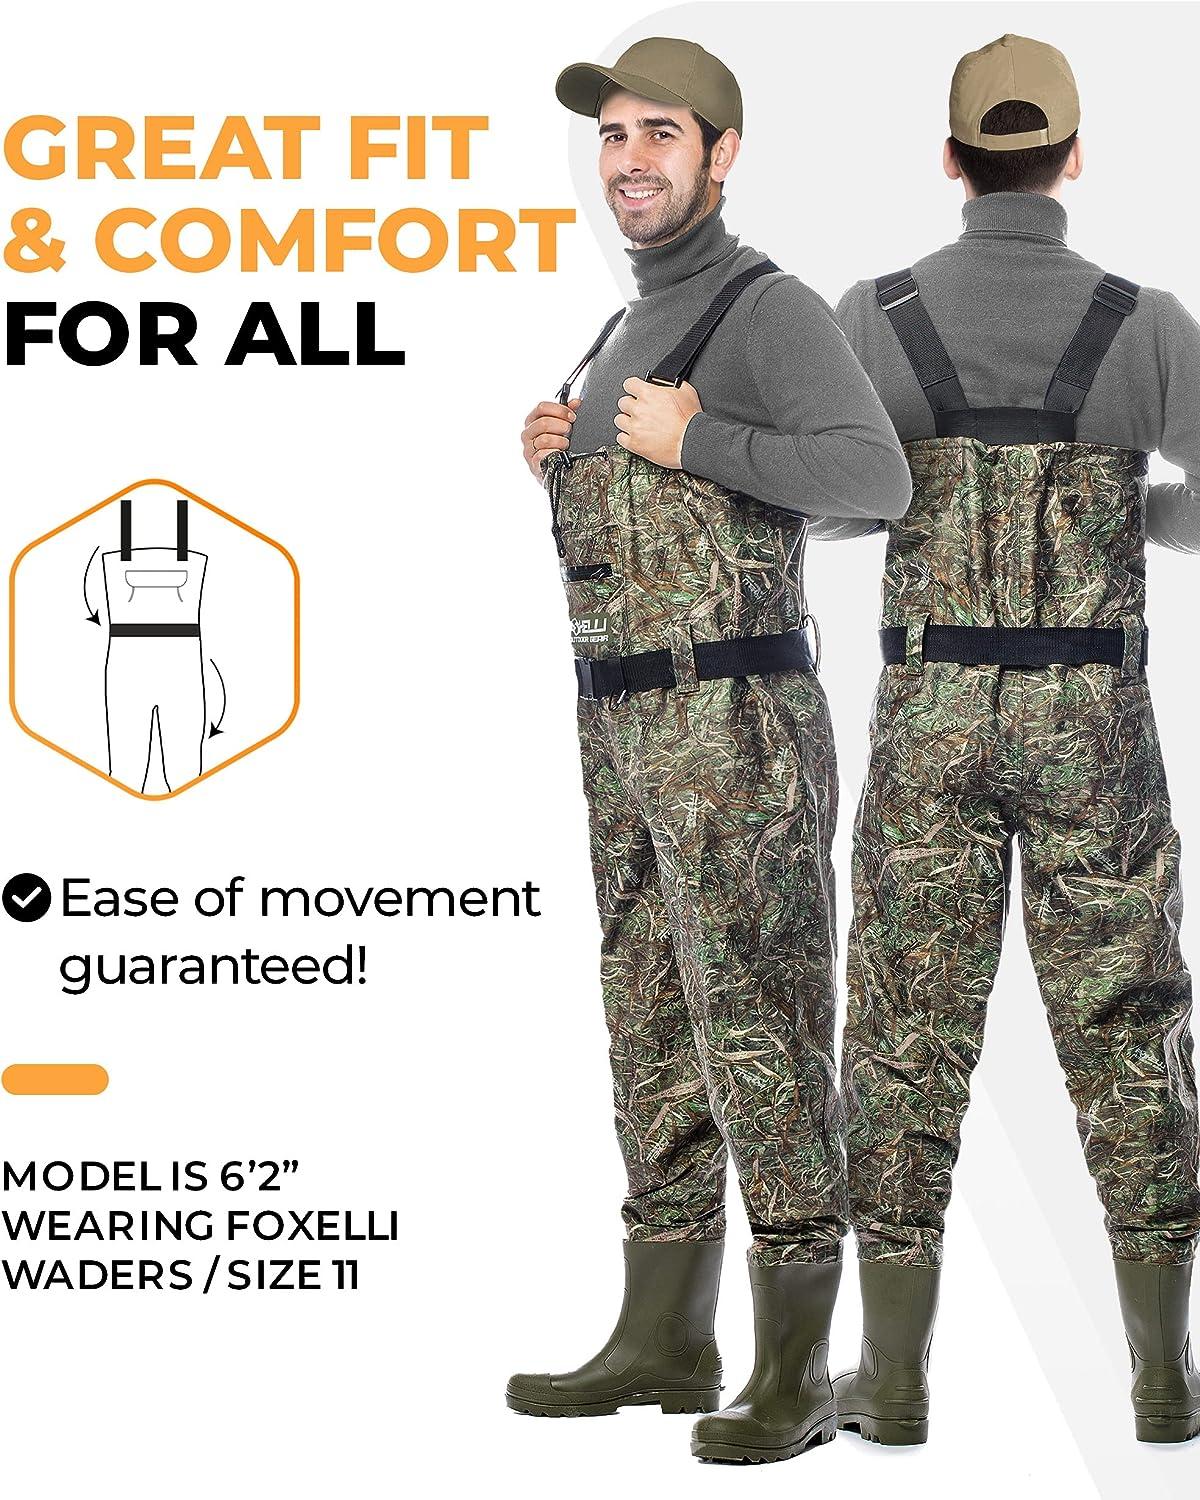 Foxelli Chest Waders Camo Hunting Fishing Waders for Men and Women